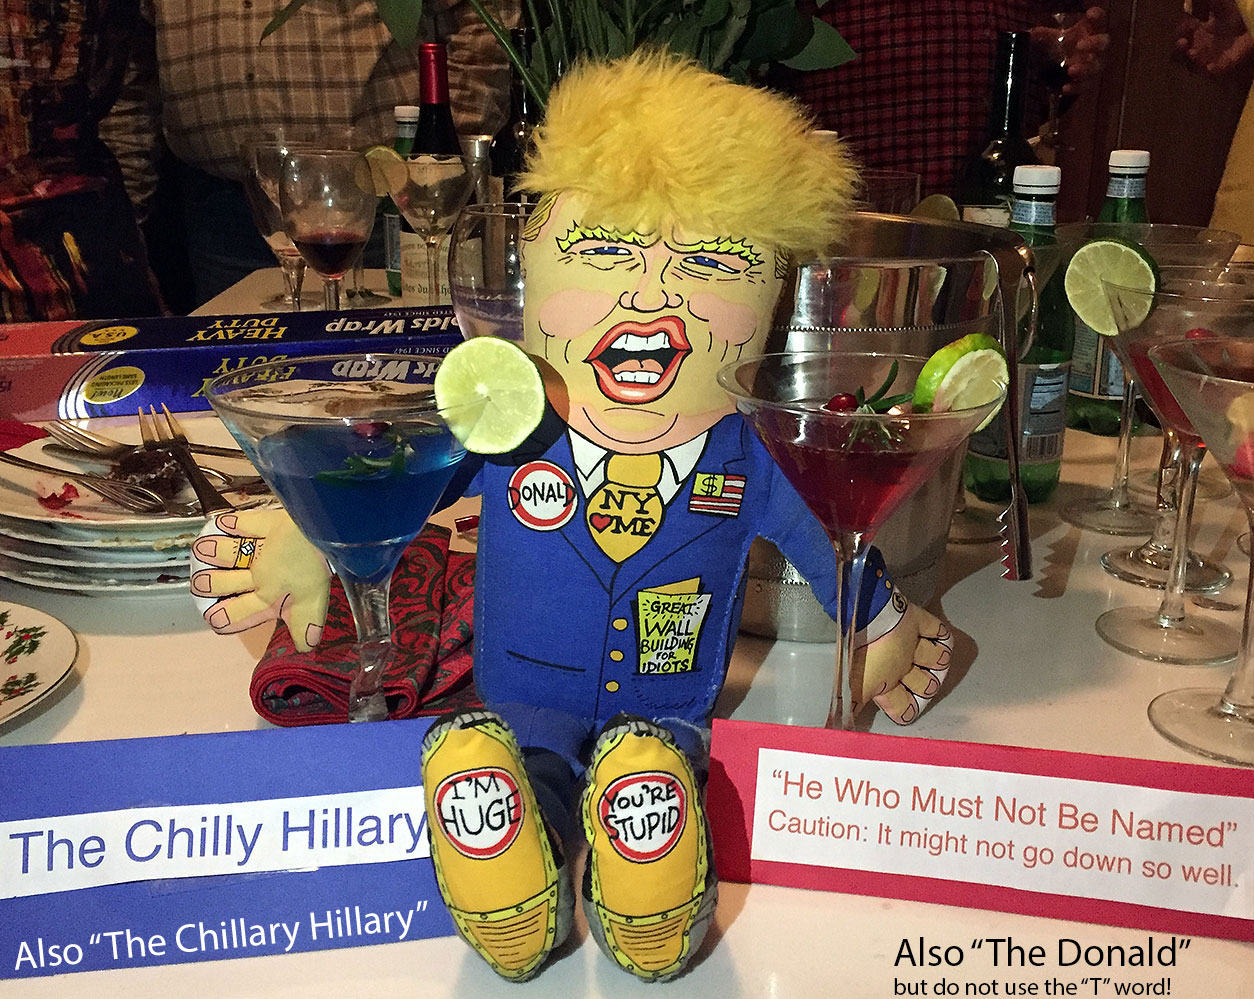 Chillary Hillary and The Donald cocktail martini